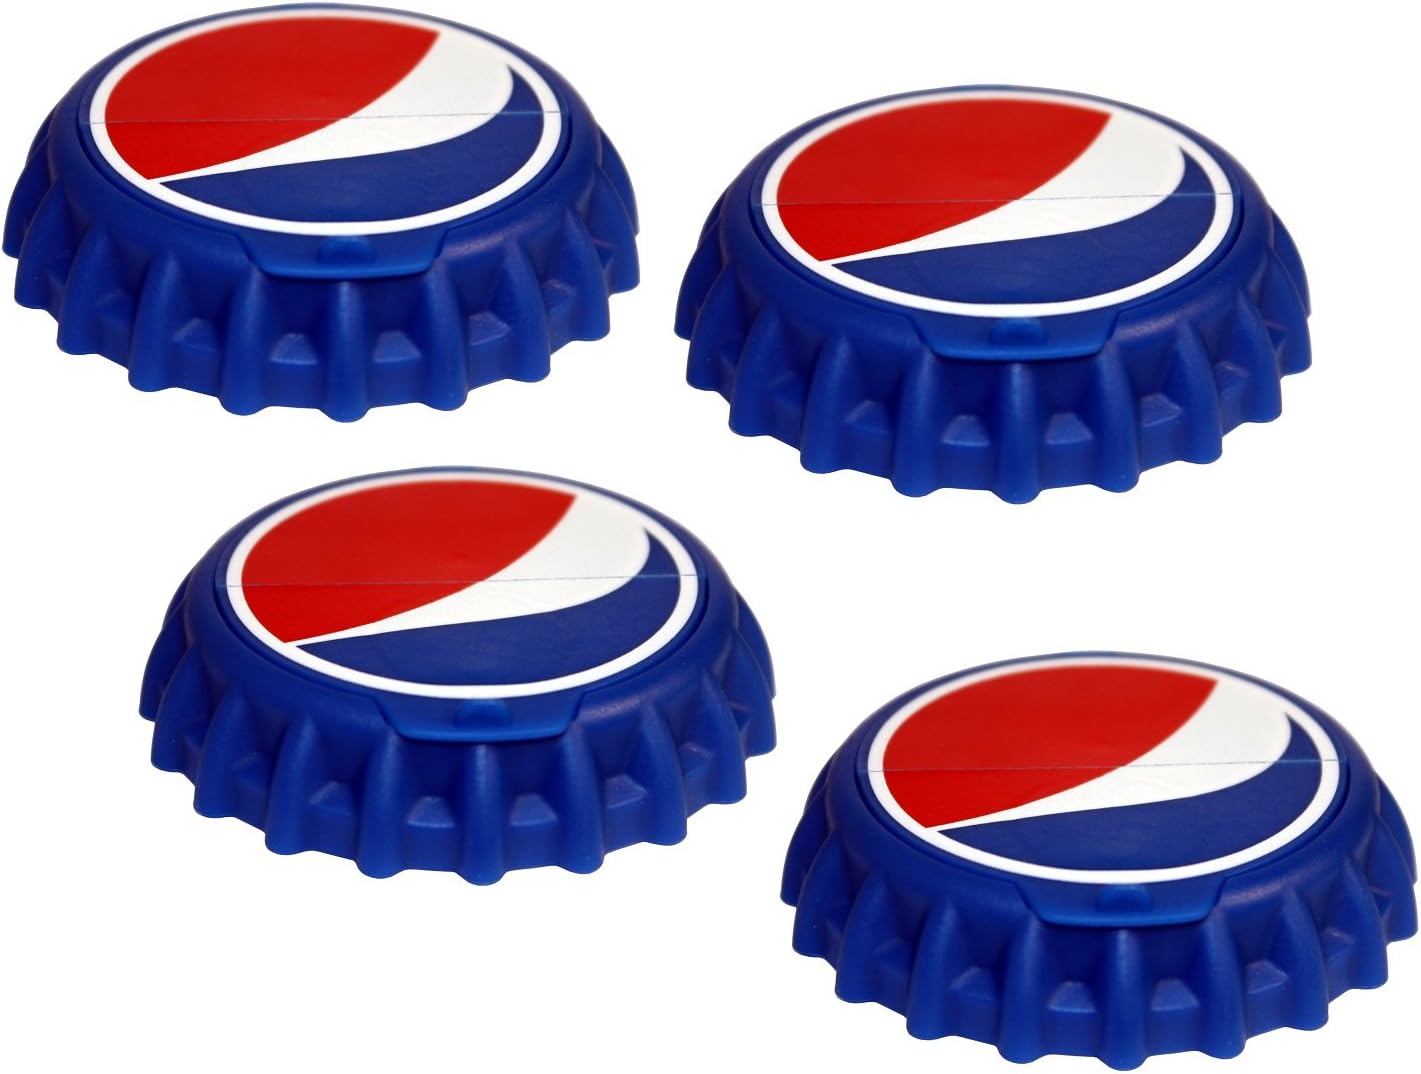 Jokari 4 Count Pepsi Modern Logo Snap and Sip Can Caps, Red/White/Blue